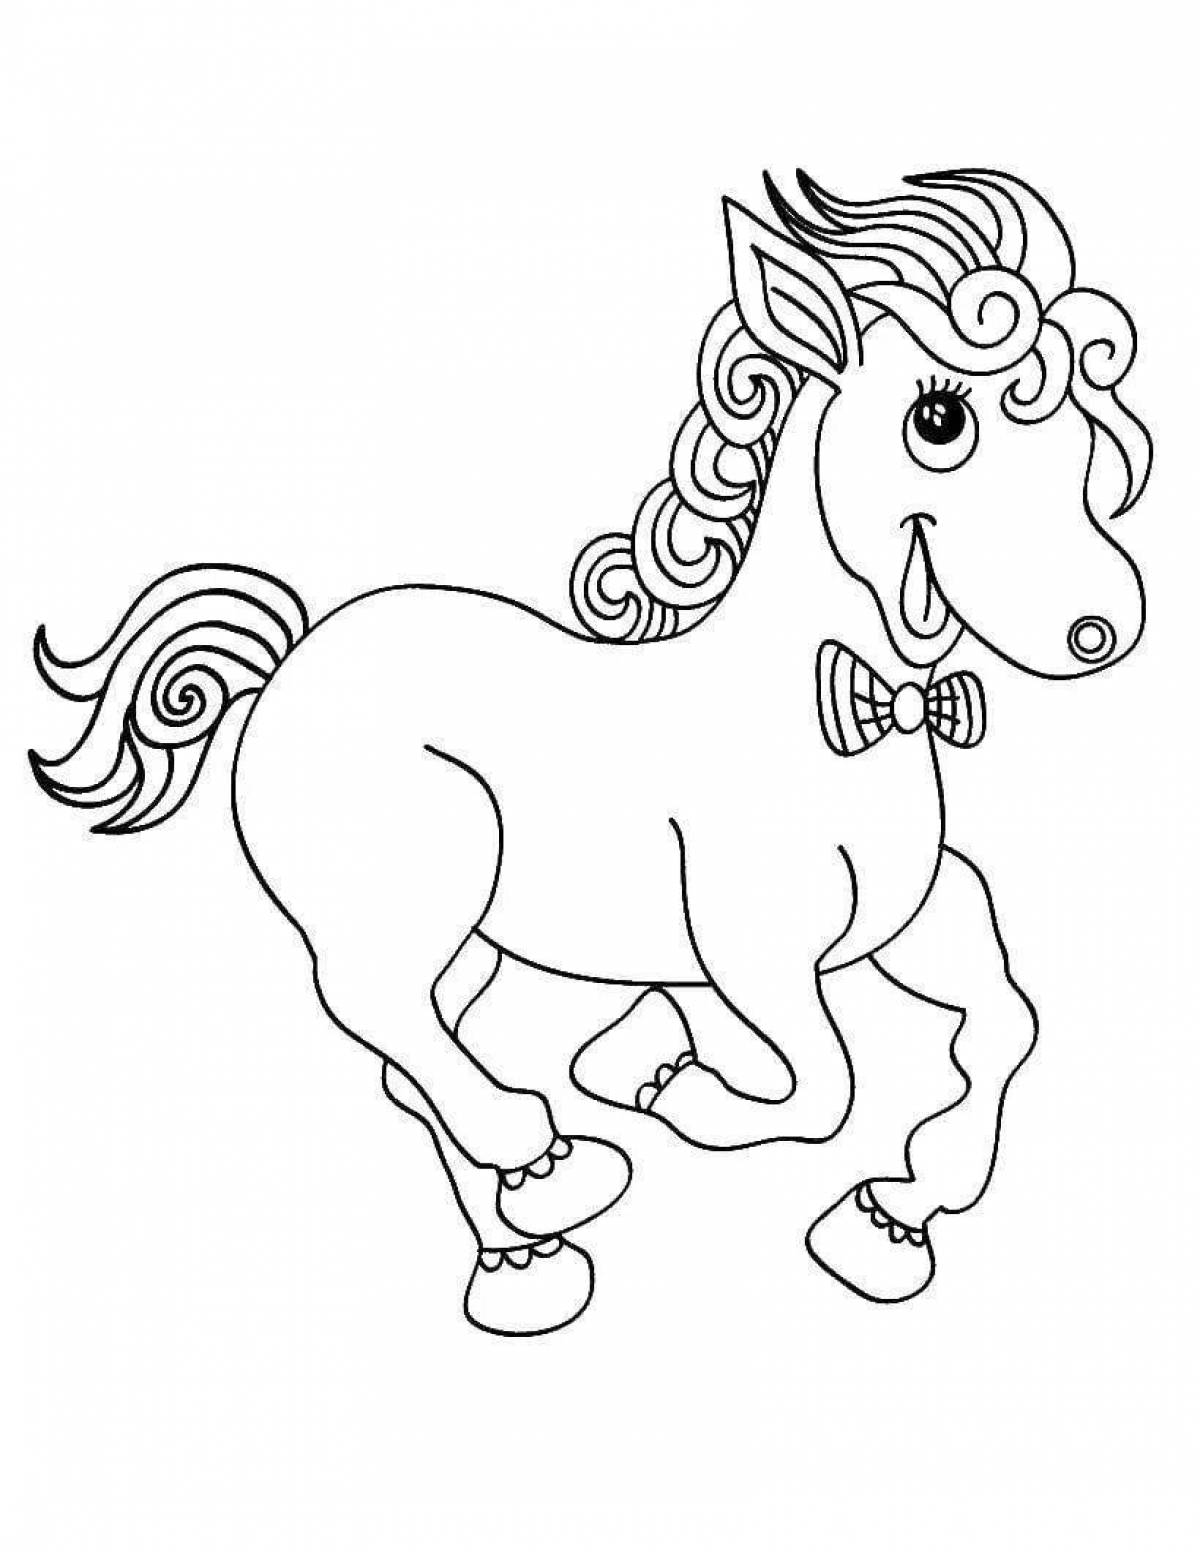 Colorful cartoon horse coloring page